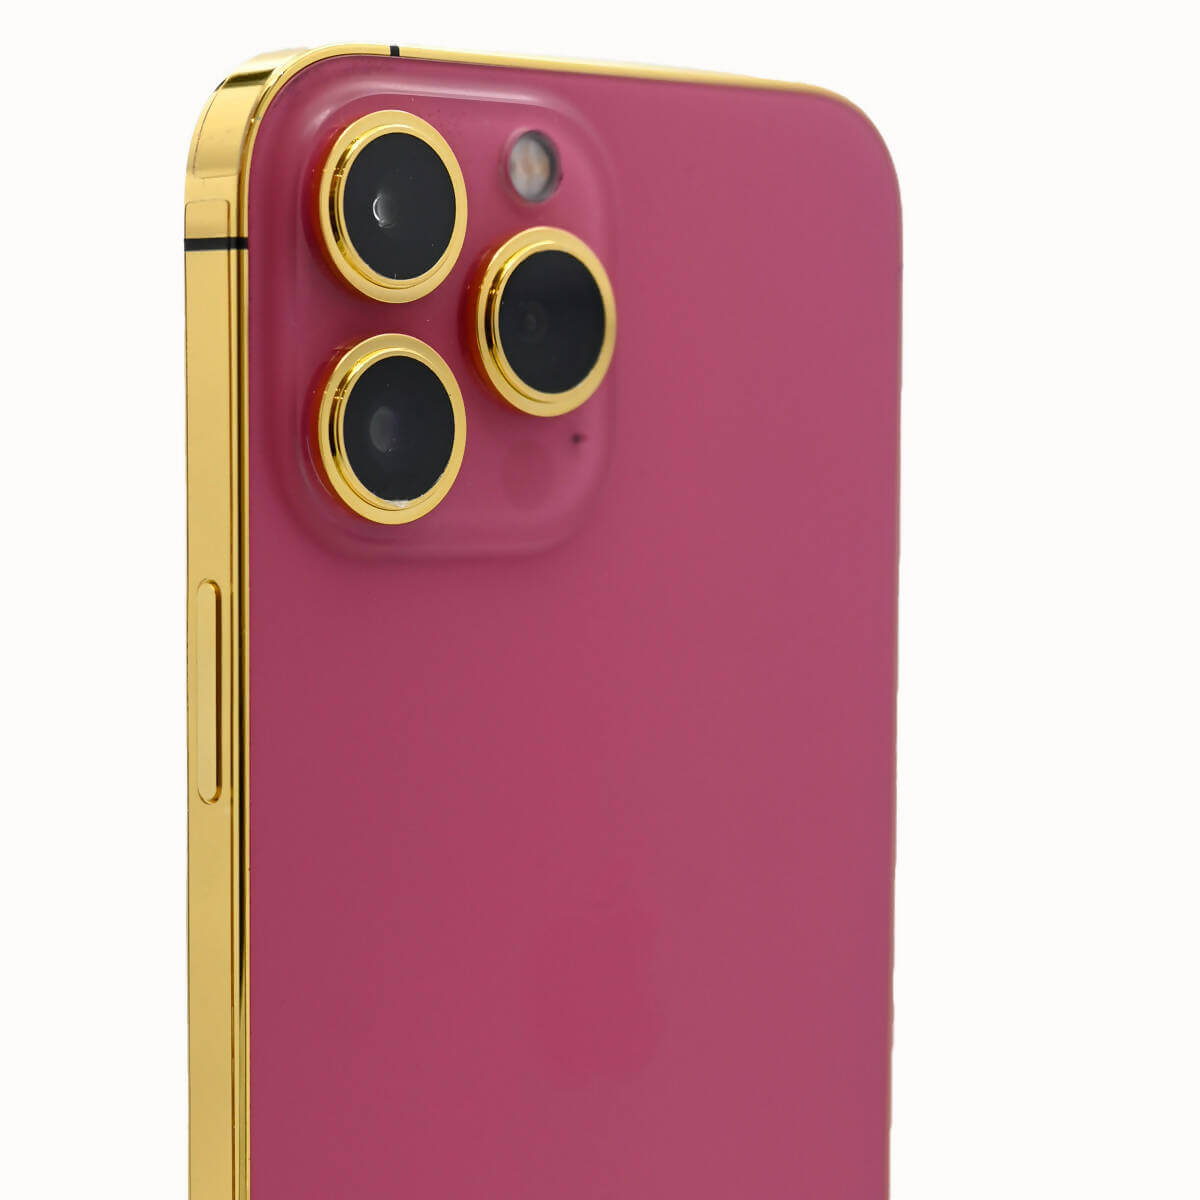 24K Gold Plated Frame Apple iPhone 13 Pro Max - Pink- 128 GB (Back Top)